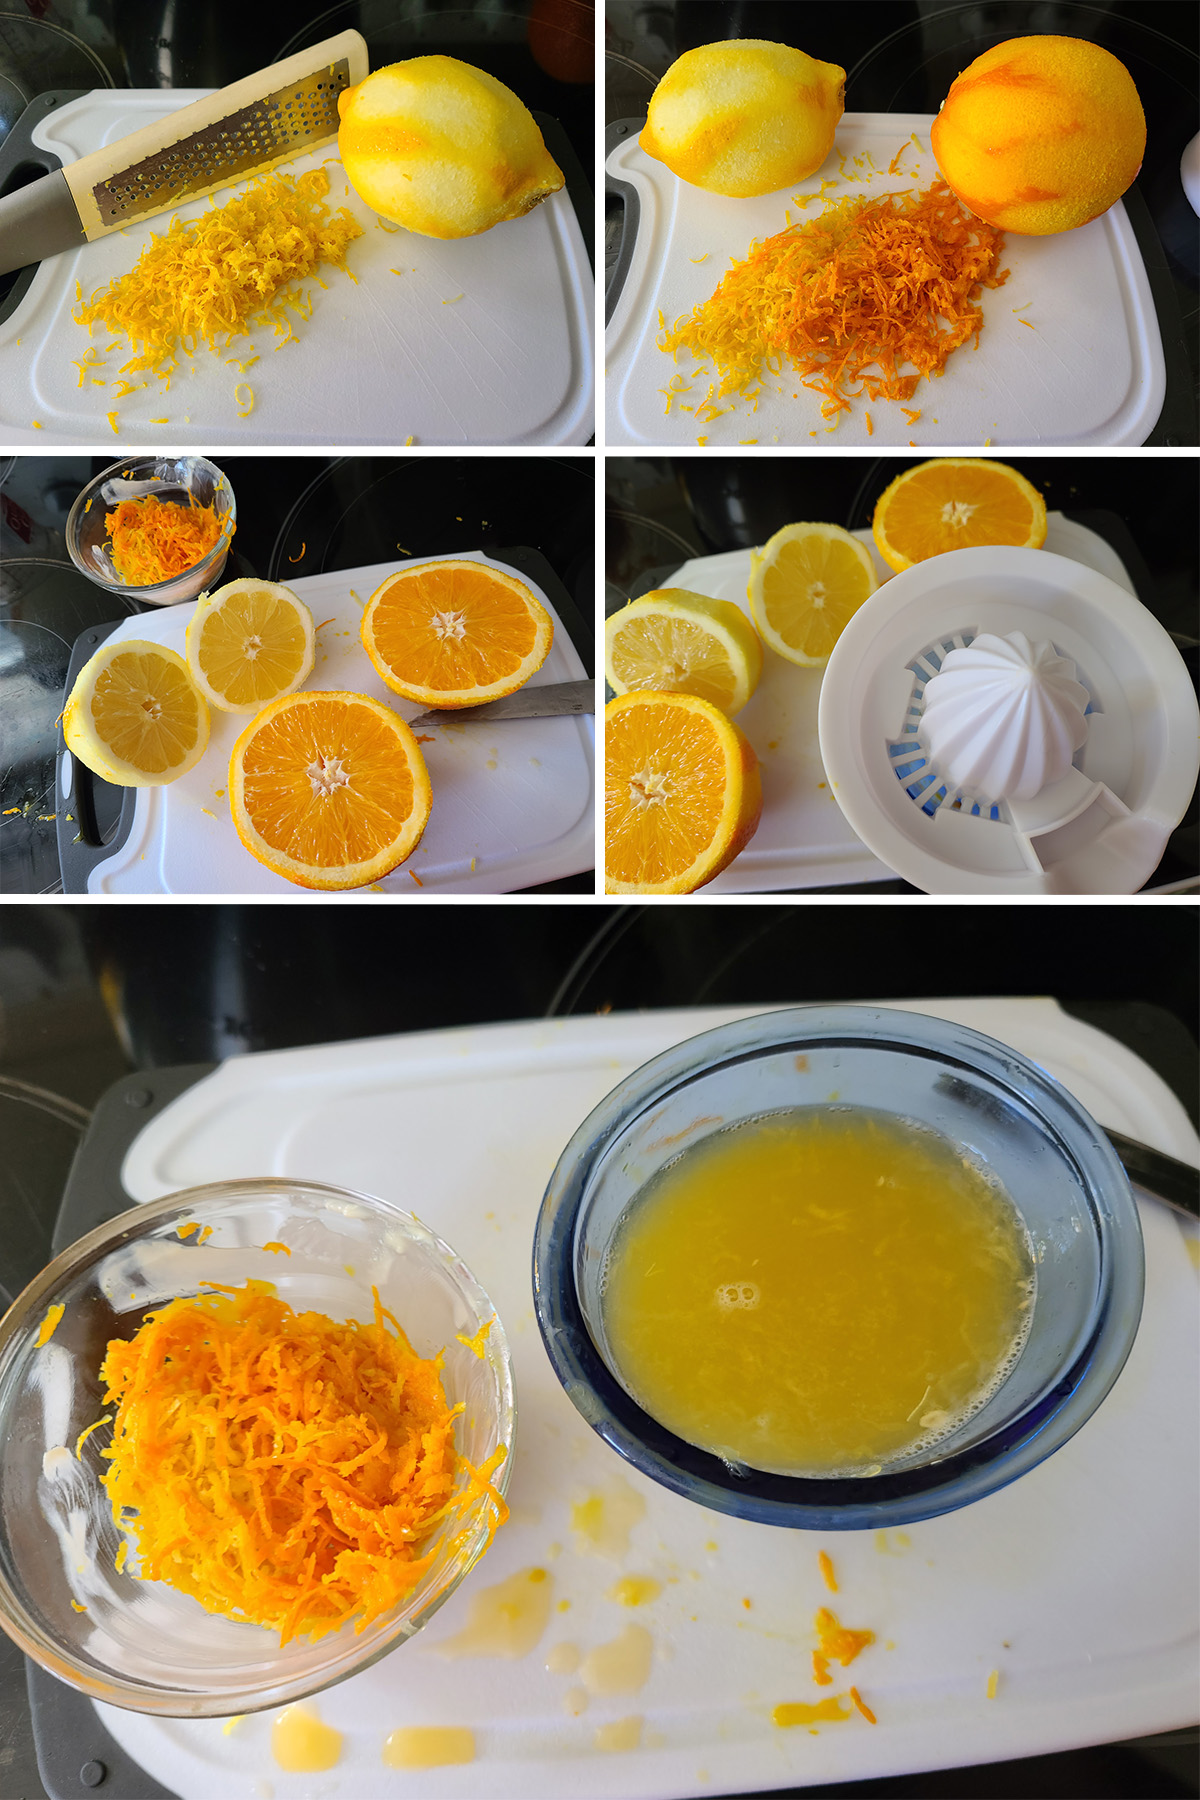 A 5 part image showing the lemon and orange being zested and juiced.